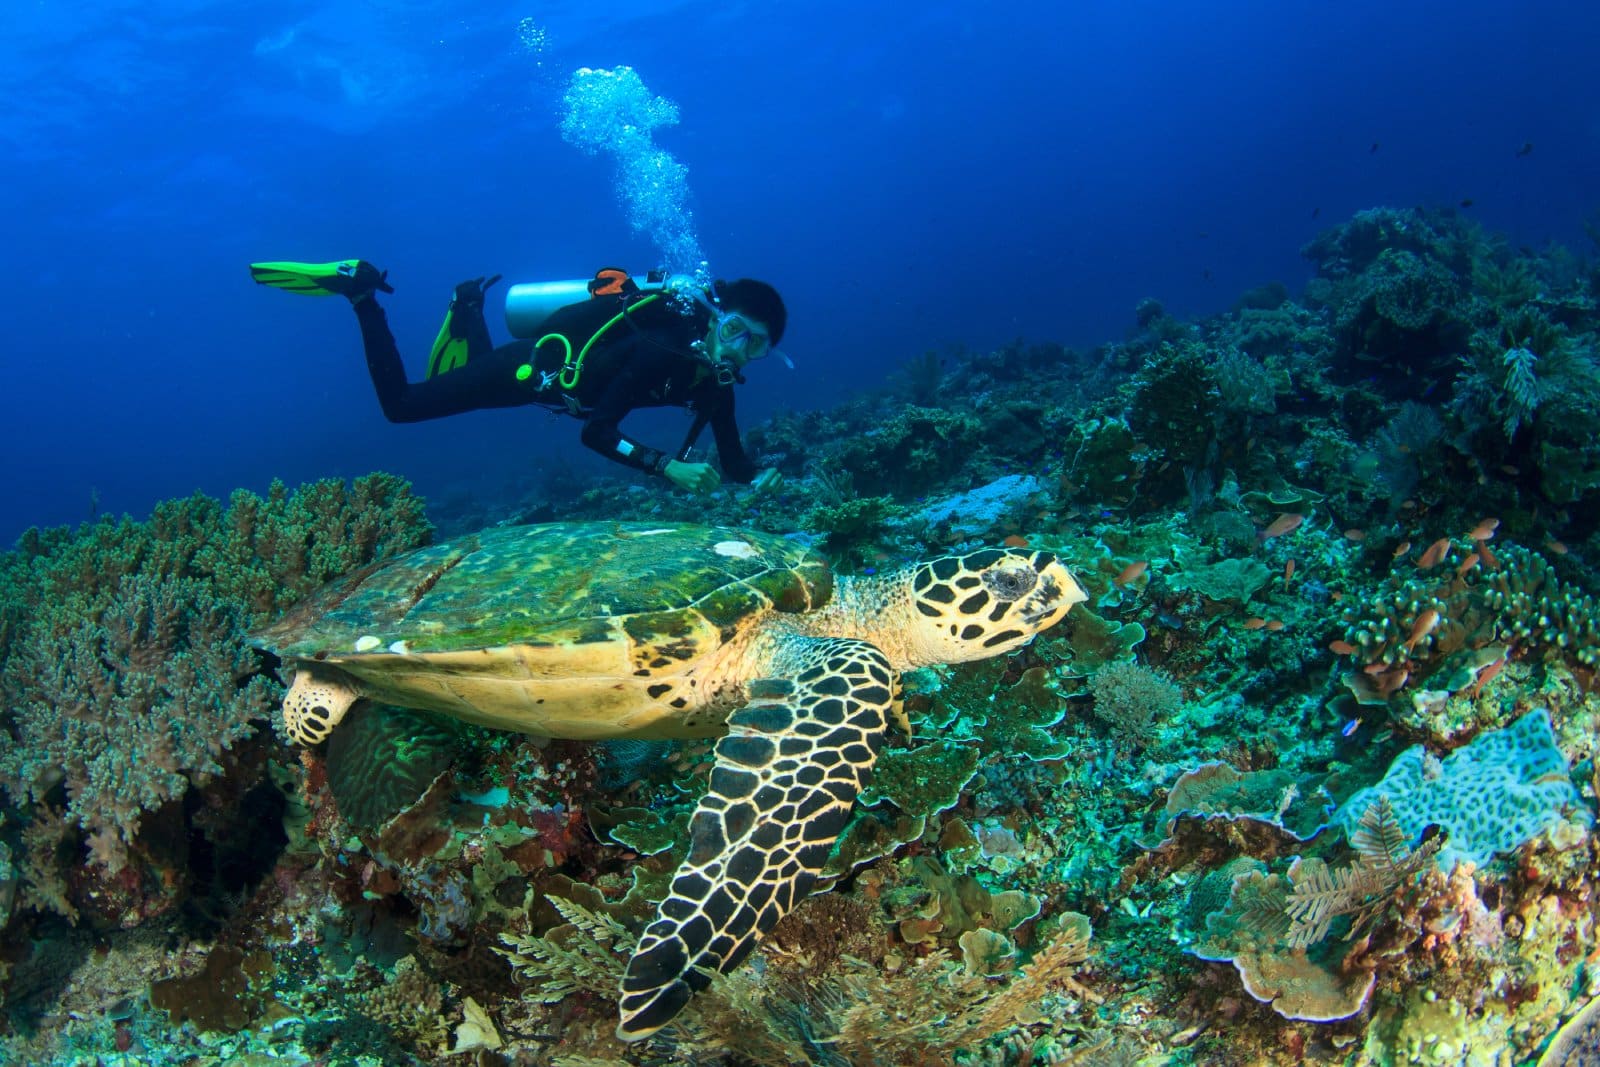 <p class="wp-caption-text">Image Credit: Shutterstock / Rich Carey</p>  <p><span>Conservation-focused diving allows divers to contribute to the preservation of marine ecosystems. Participating in coral reef restoration projects, invasive species removal, and citizen science initiatives are just a few ways divers can make a positive impact.</span></p> <p><b>Insider’s Tip:</b><span> Seek out dive operators and organizations prioritizing ecological sustainability and offering conservation programs. Your participation enriches your diving experience and helps protect the underwater environments you love.</span></p>